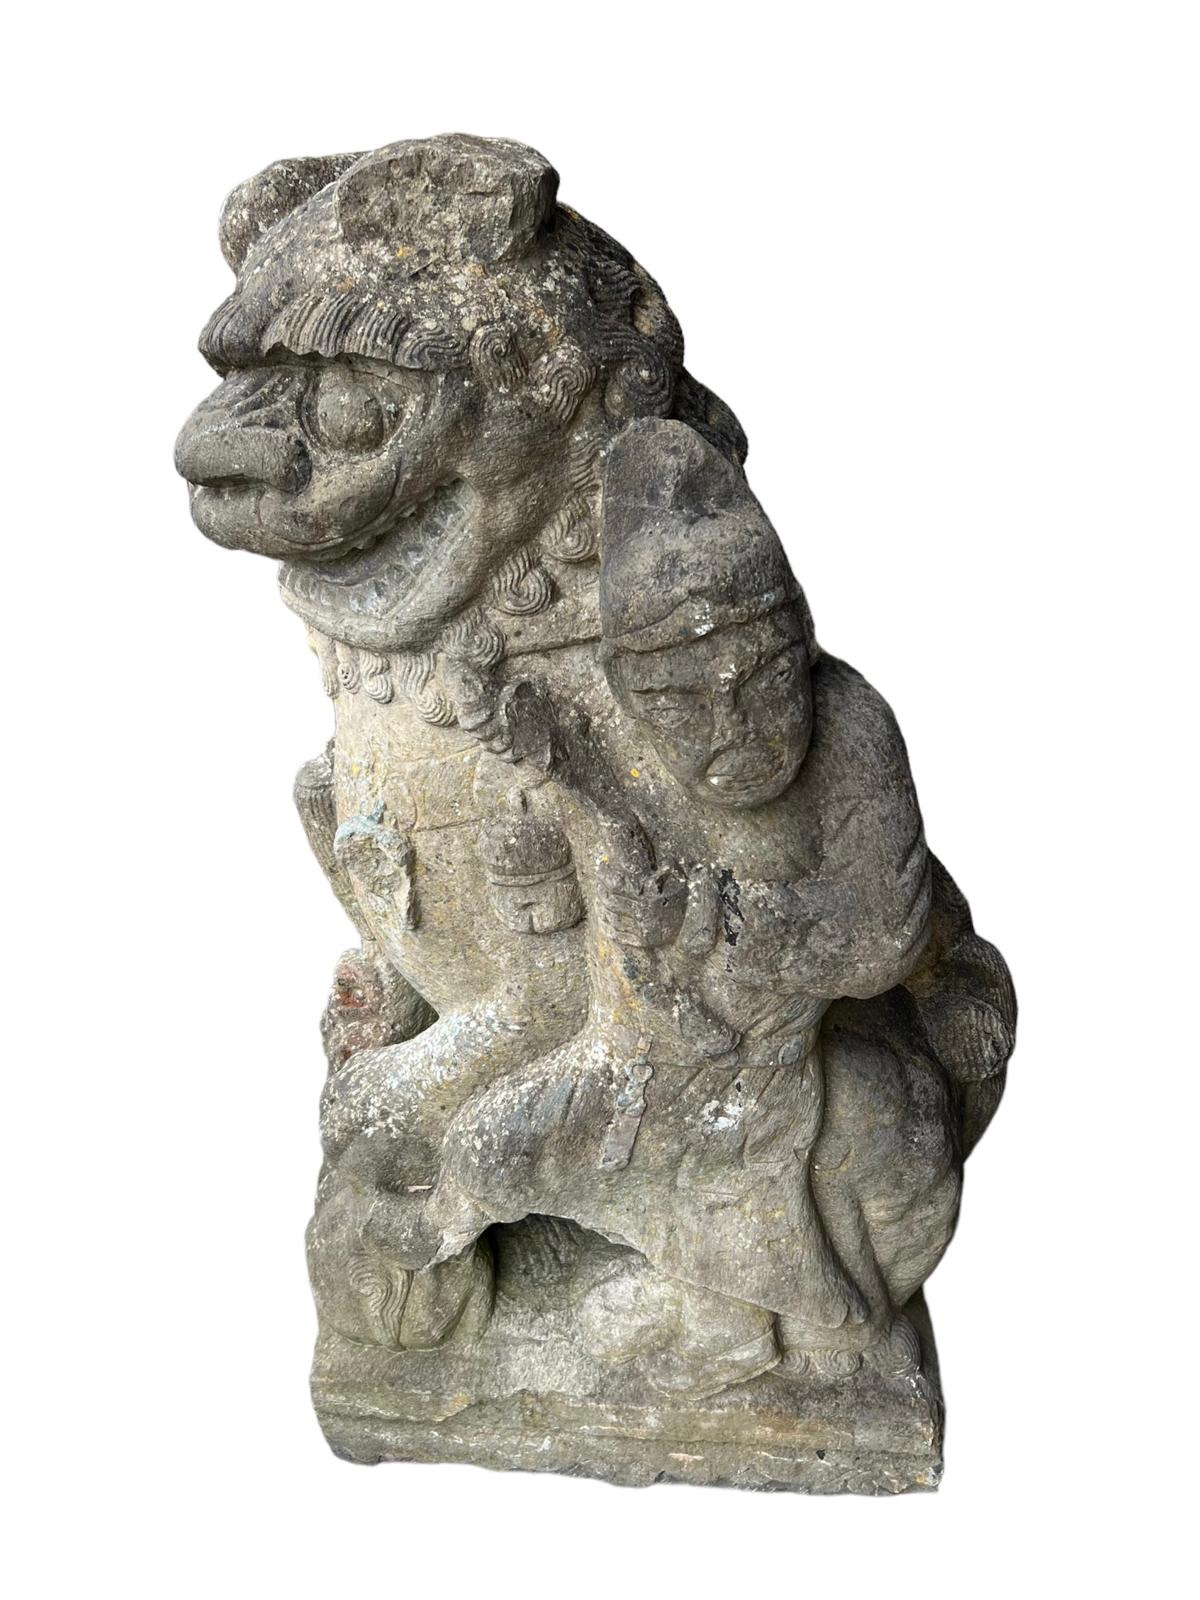 A LARGE RARE PAIR OF CHINESE 15TH CENTURY CARVED STONE MING DYNASTY YONGLE PERIOD BUDDHIST LIONS - Image 8 of 20